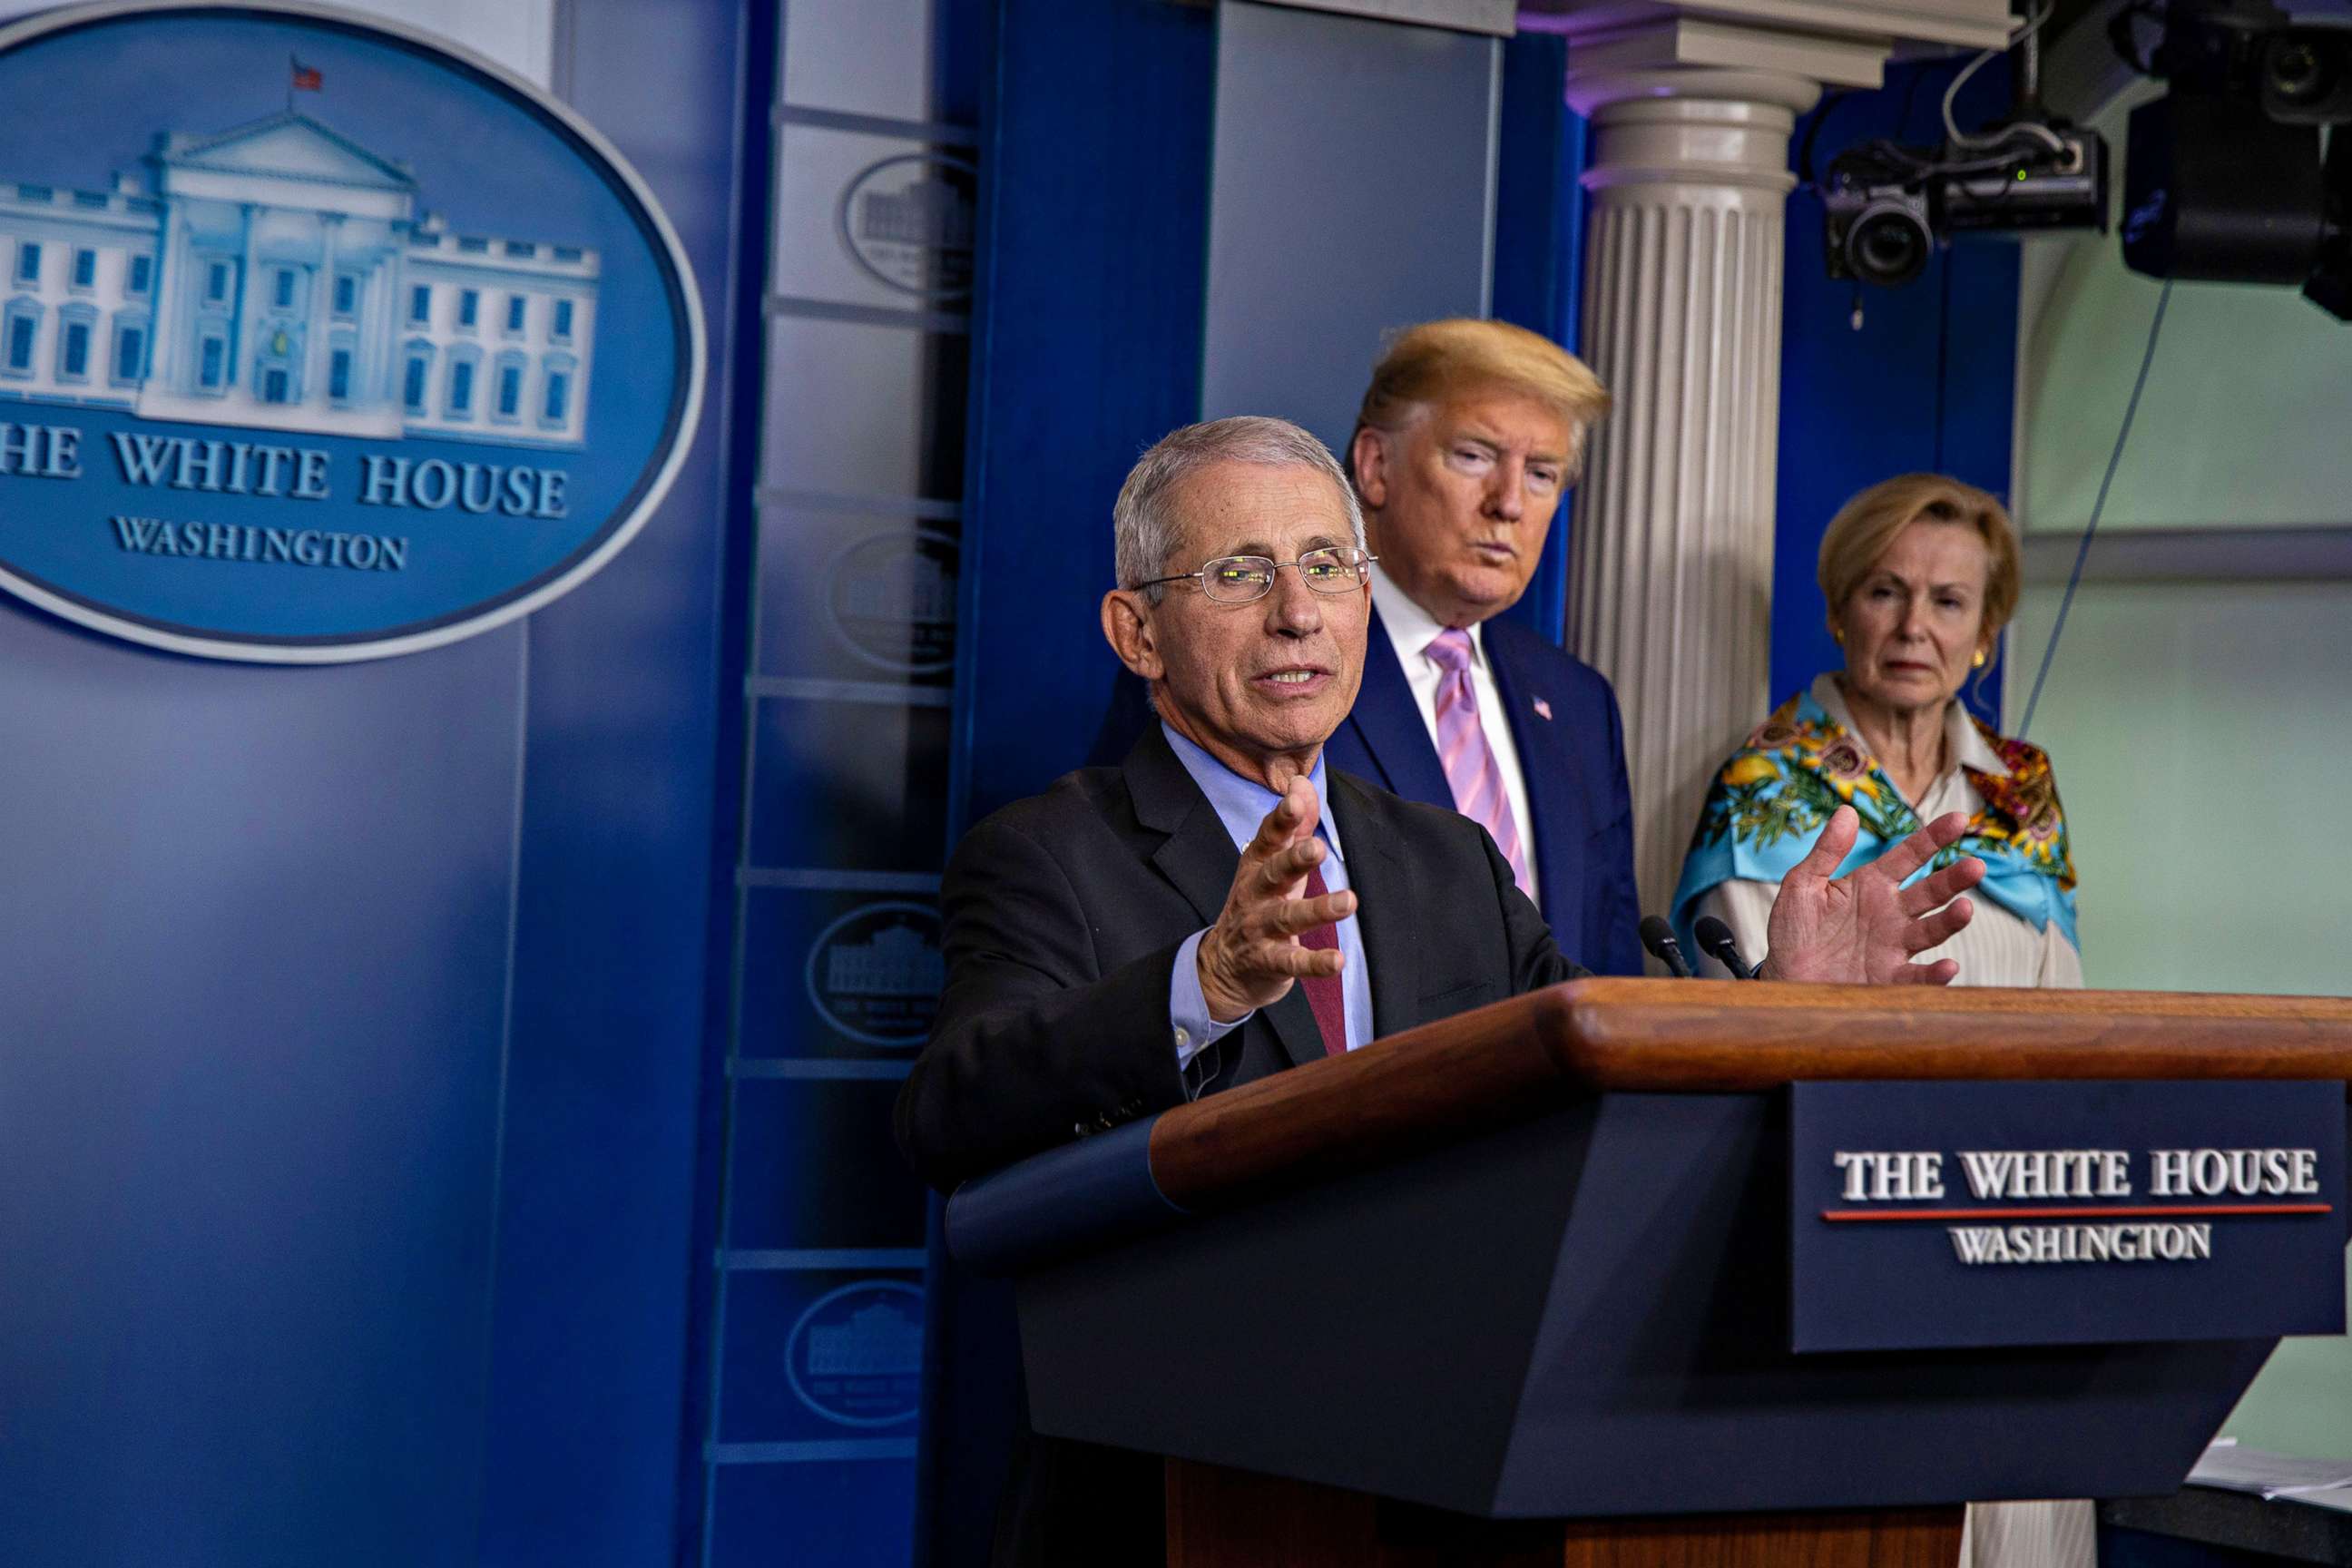 PHOTO: Anthony Fauci, Director of the National Institute of Allergy and Infectious Diseases, speaks during the daily coronavirus task force press briefing at the White House, in Washington, April 4, 2020.